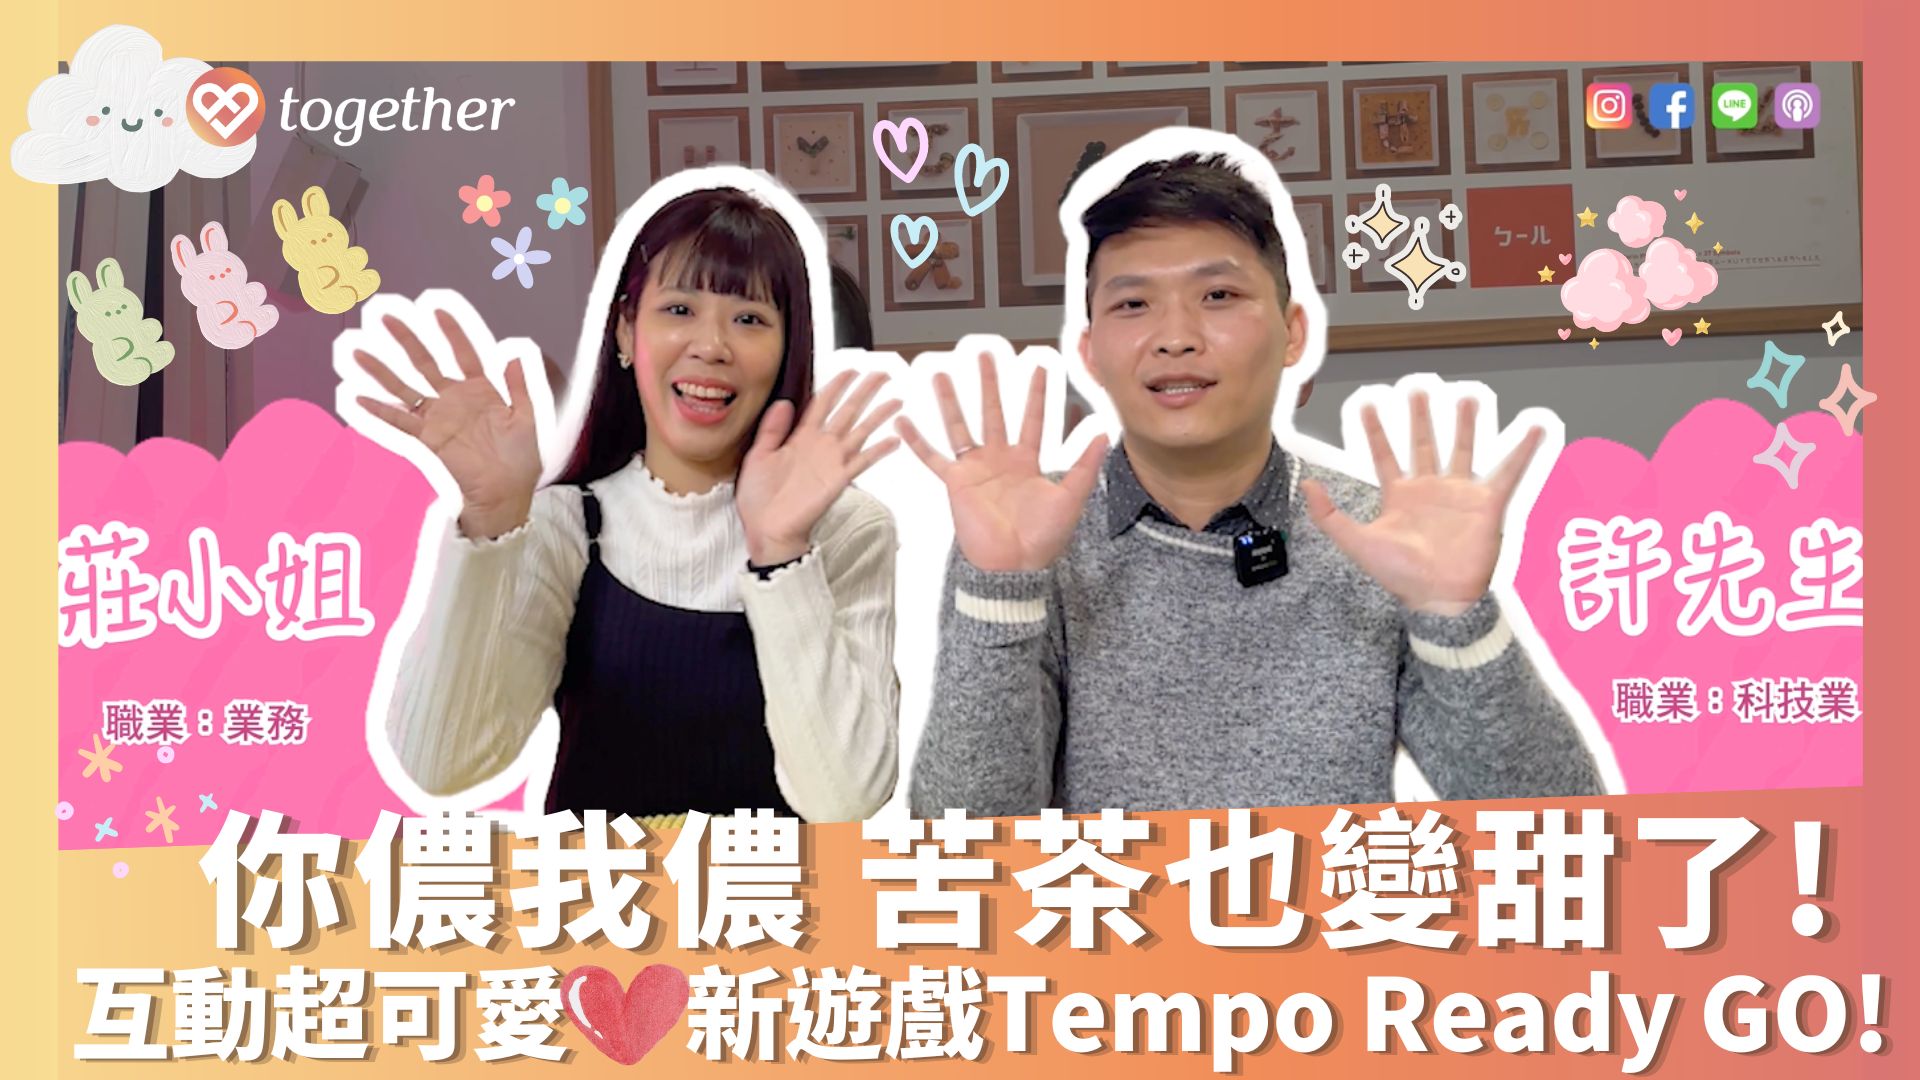 You are currently viewing 【Together】成功案例｜你儂我儂，苦茶也變甜了 ！